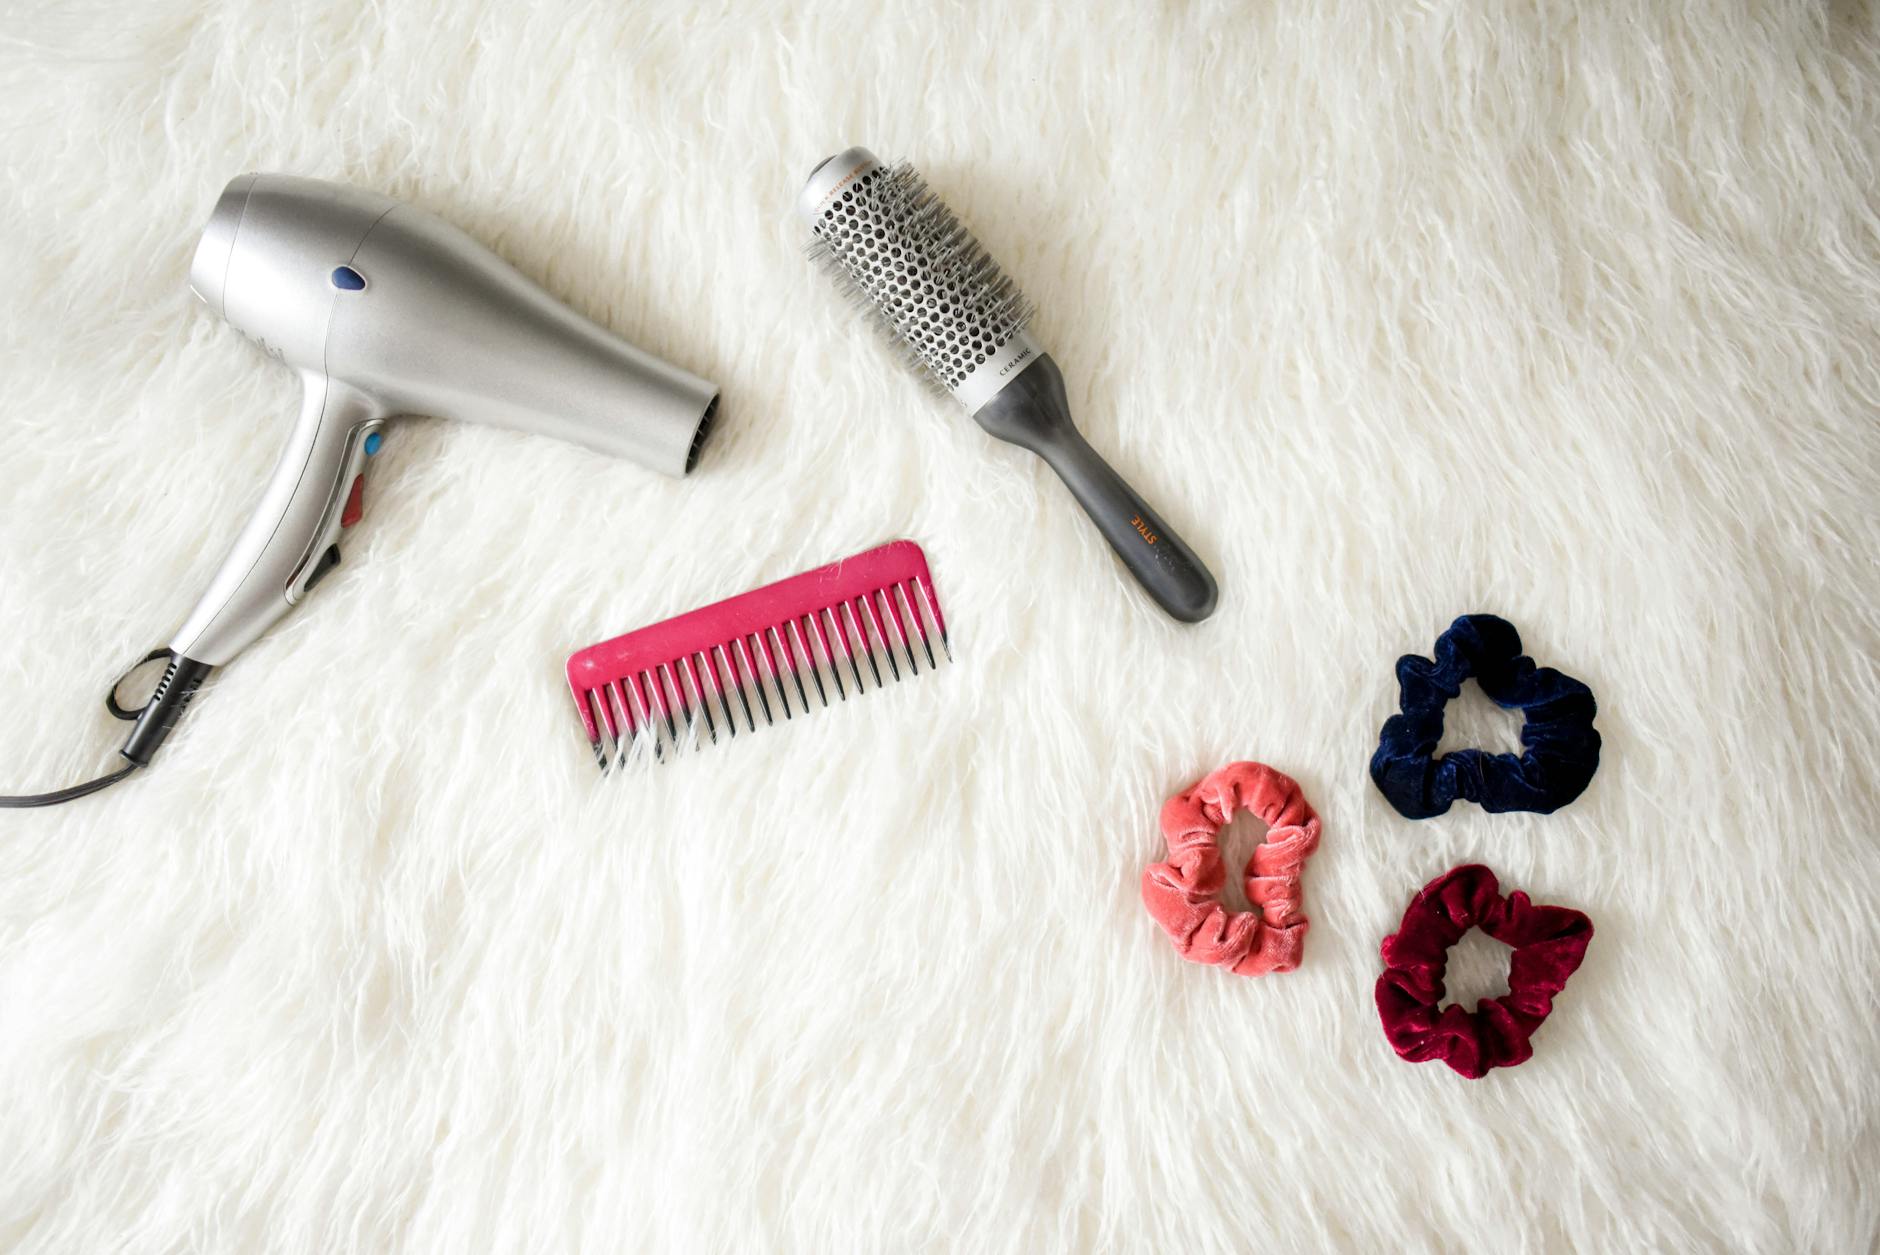 a hair dryer, comb and hair accessories